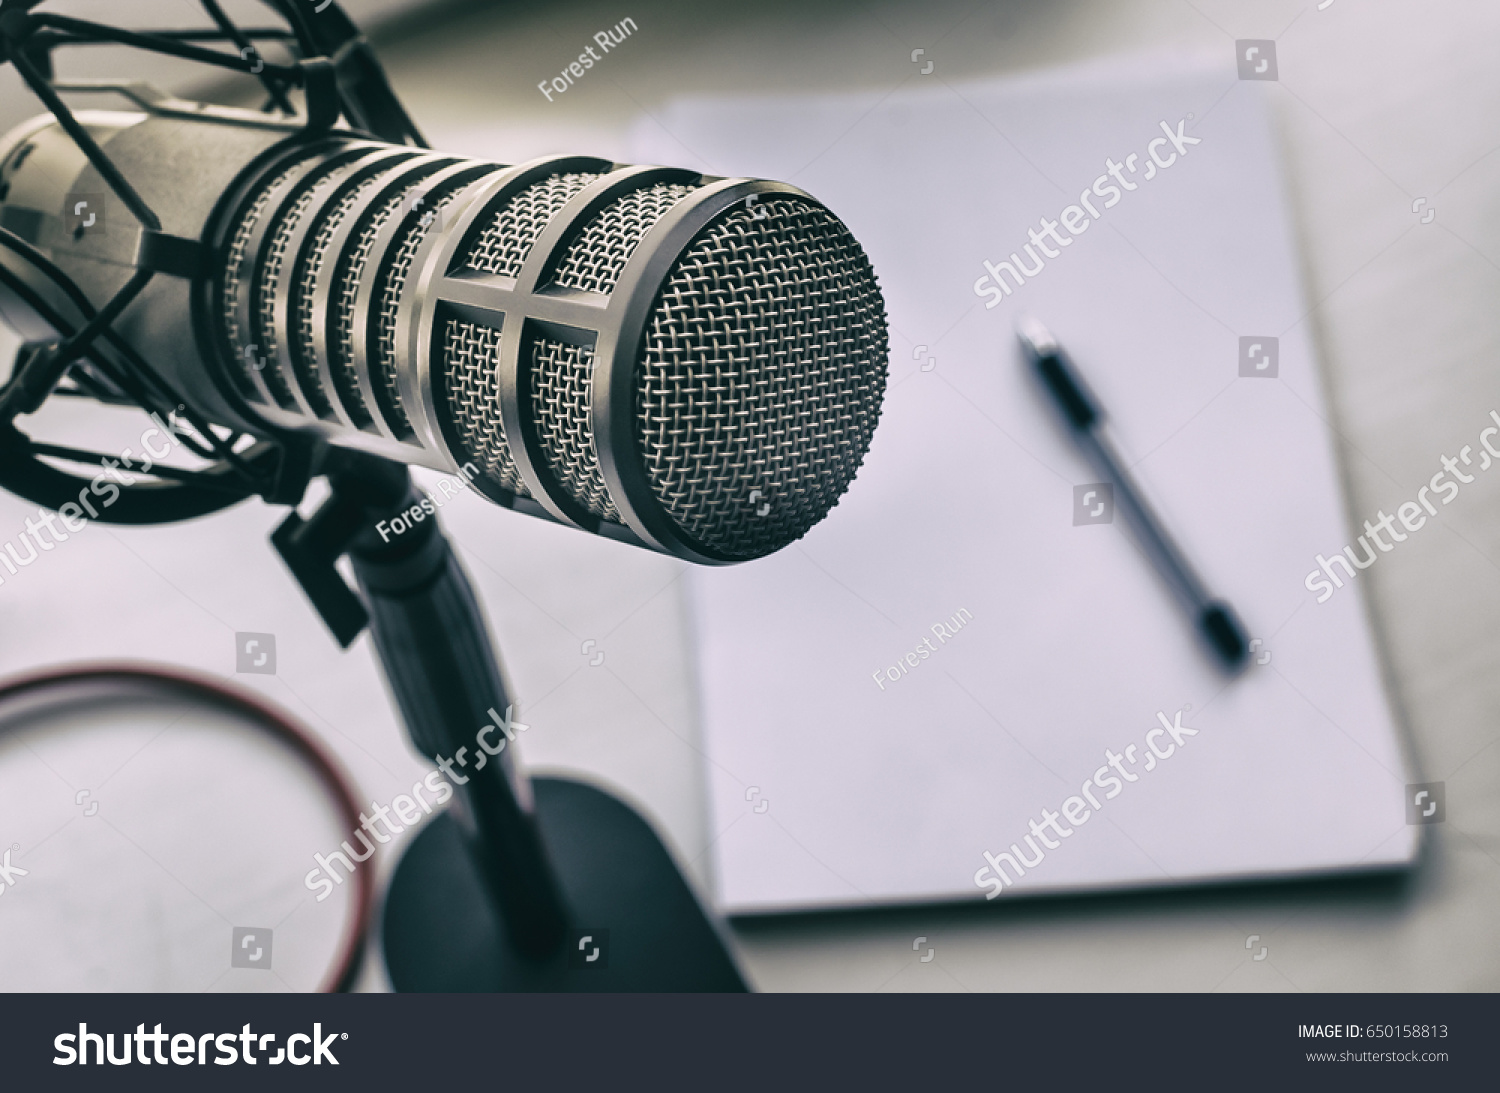 stock-photo-microphone-sheets-of-paper-and-pen-650158813.jpg